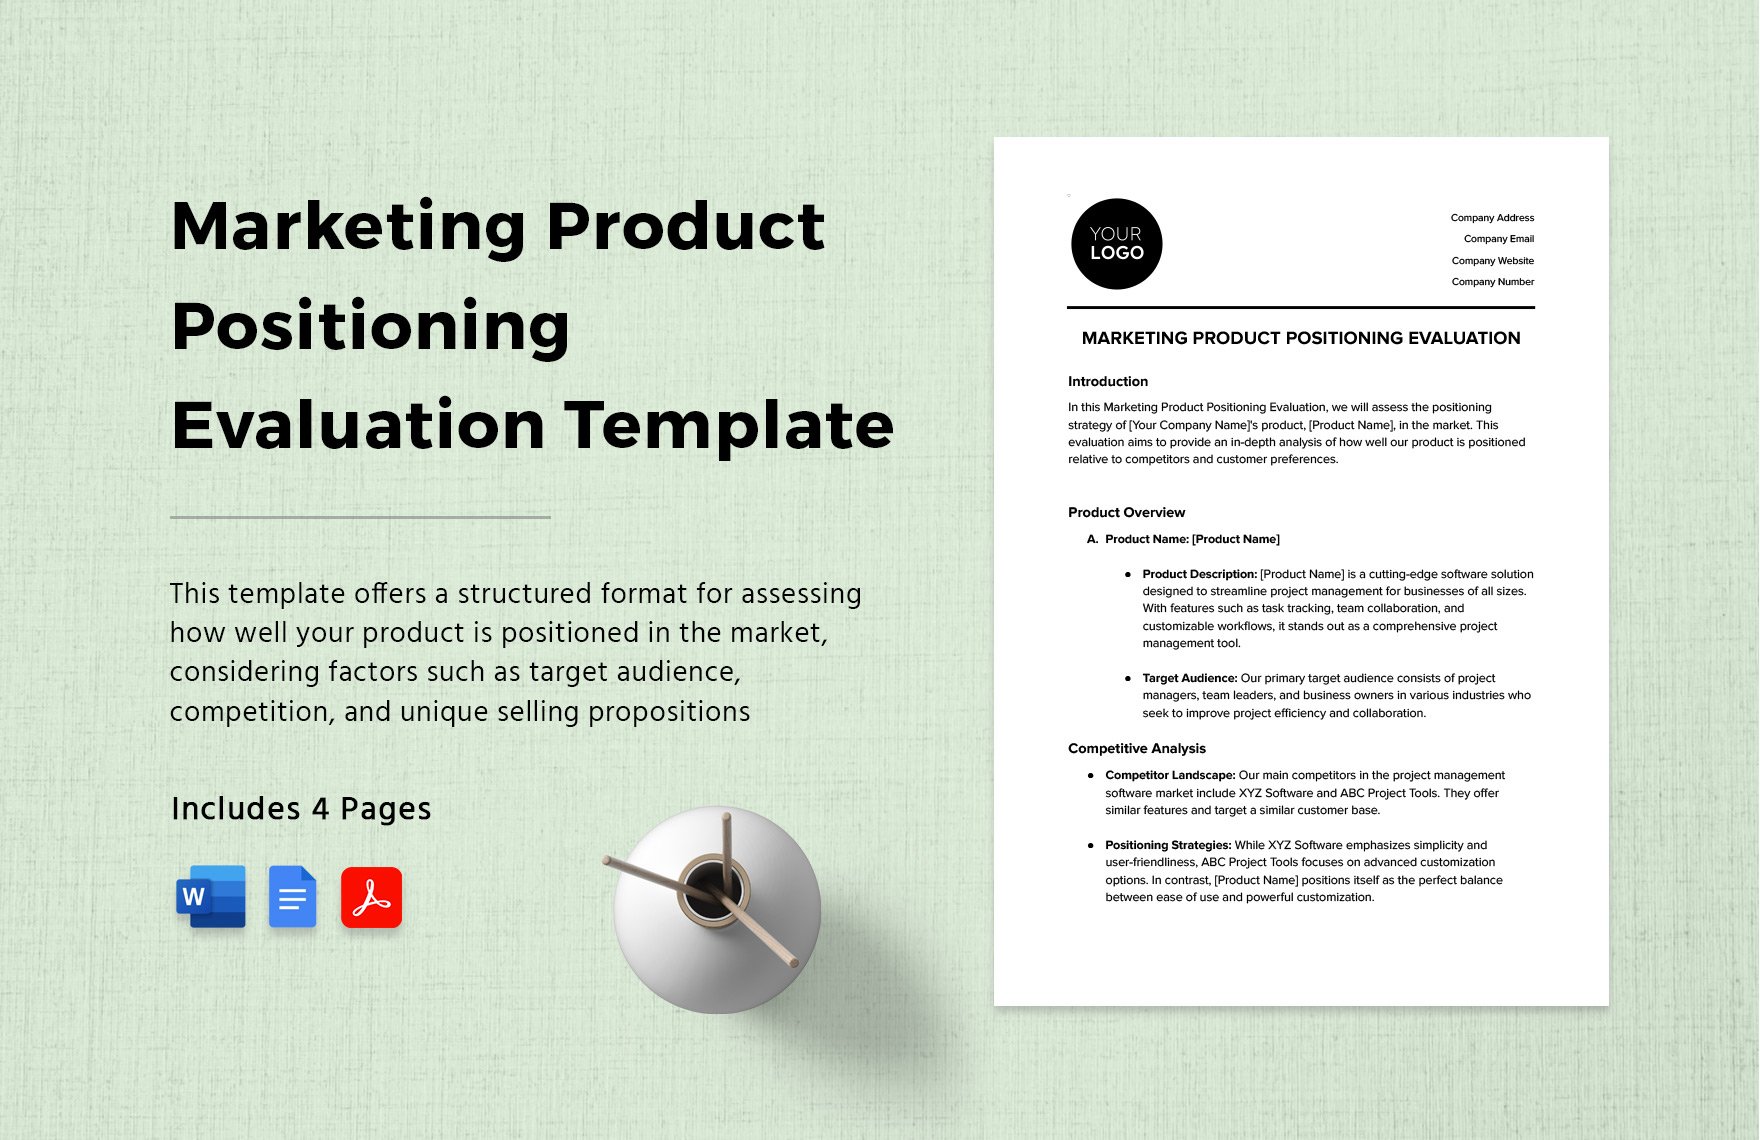 Marketing Product Positioning Evaluation Template